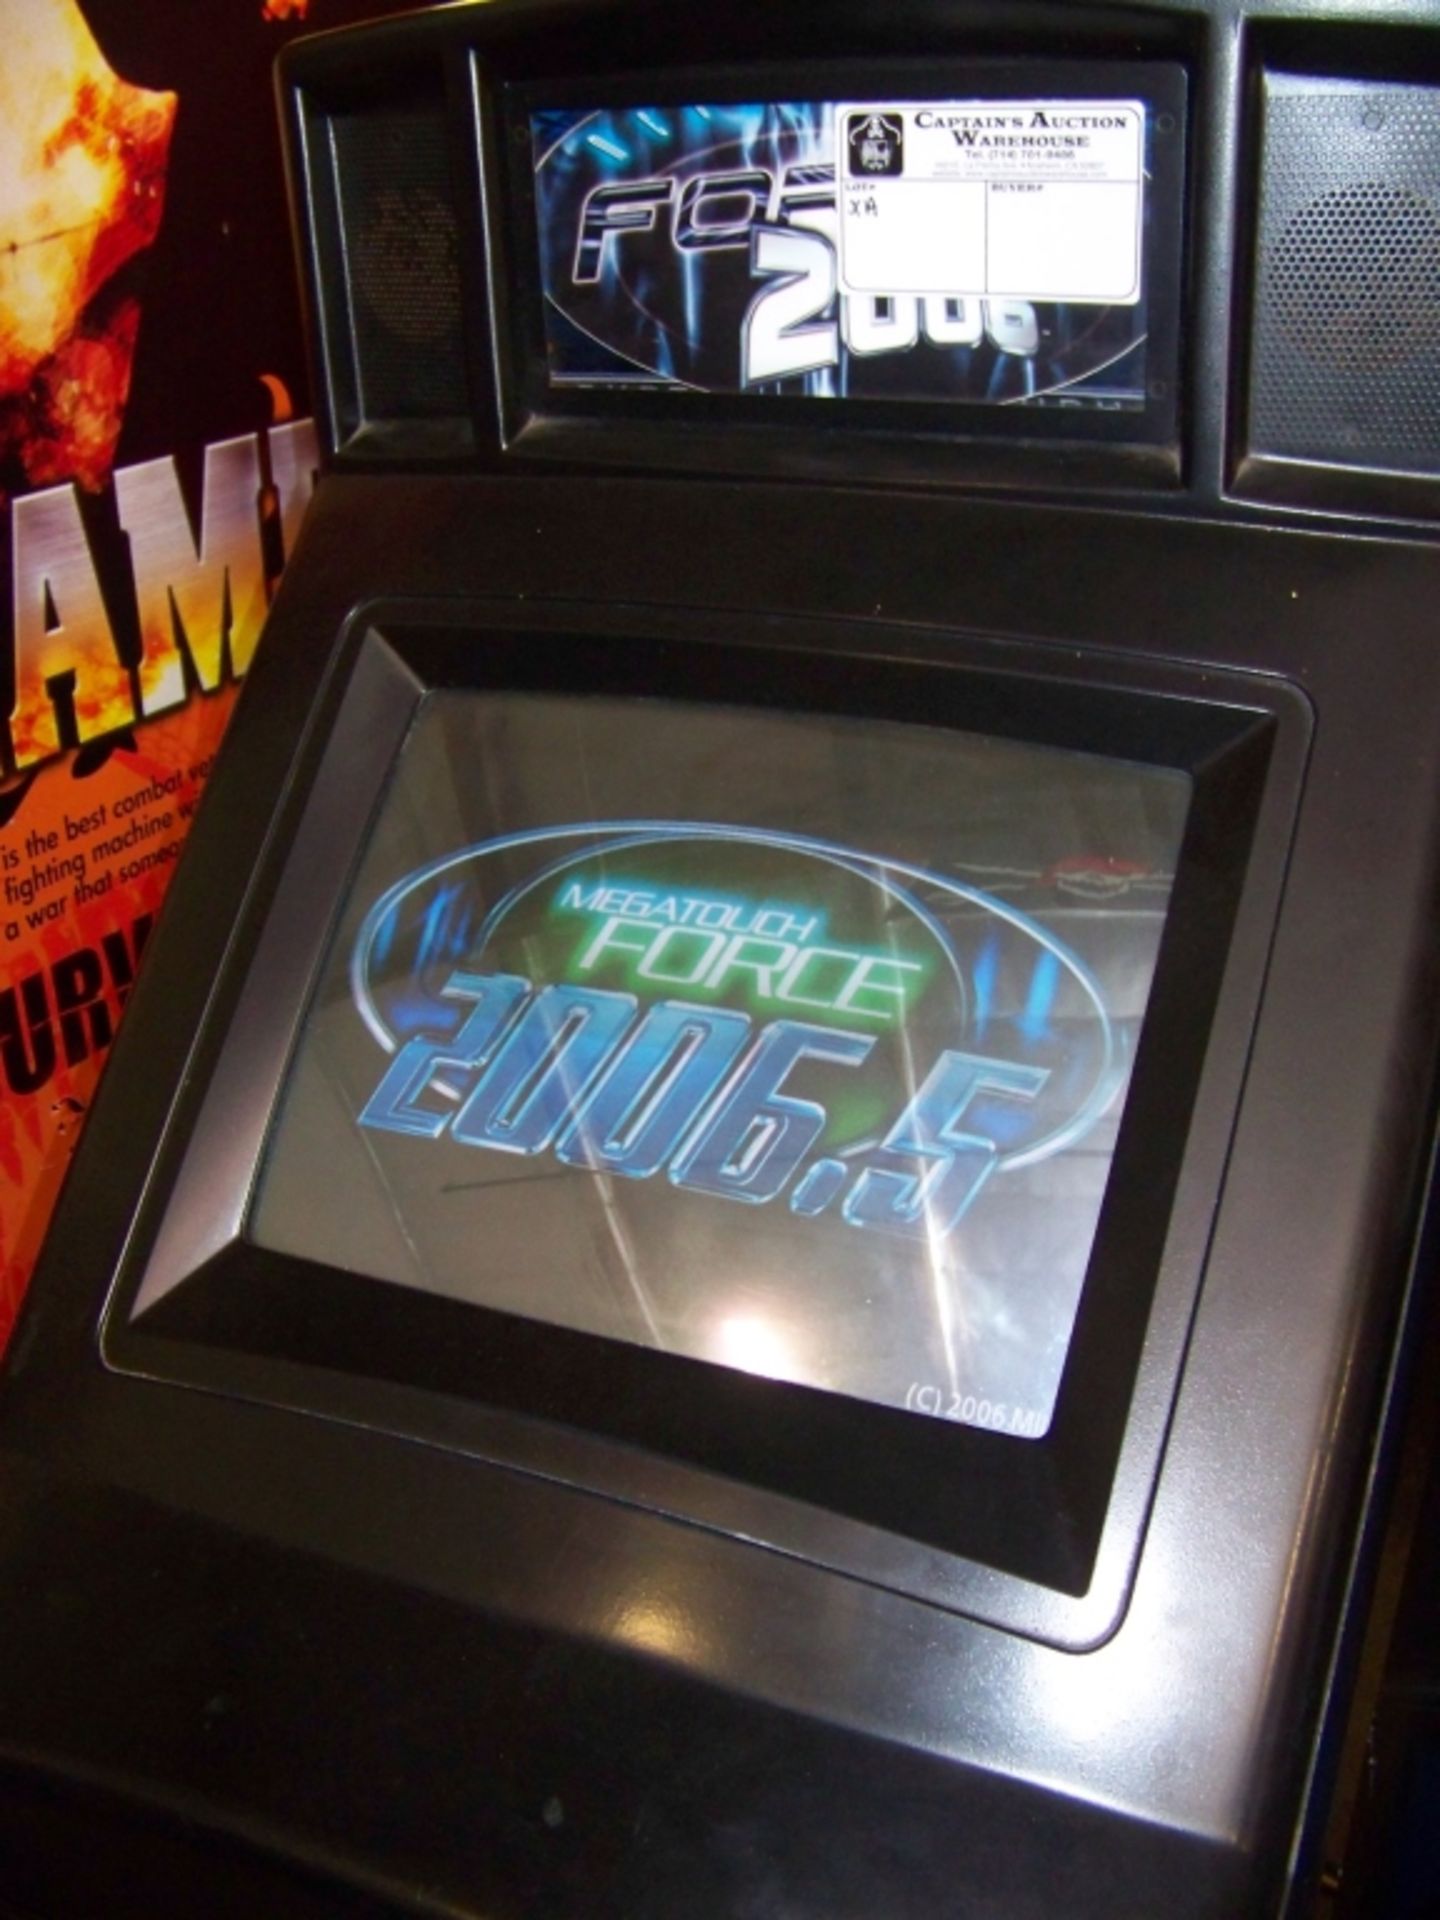 MEGATOUCH FORCE 2006.5 UPRIGHT TOUCH SCREEN GAME